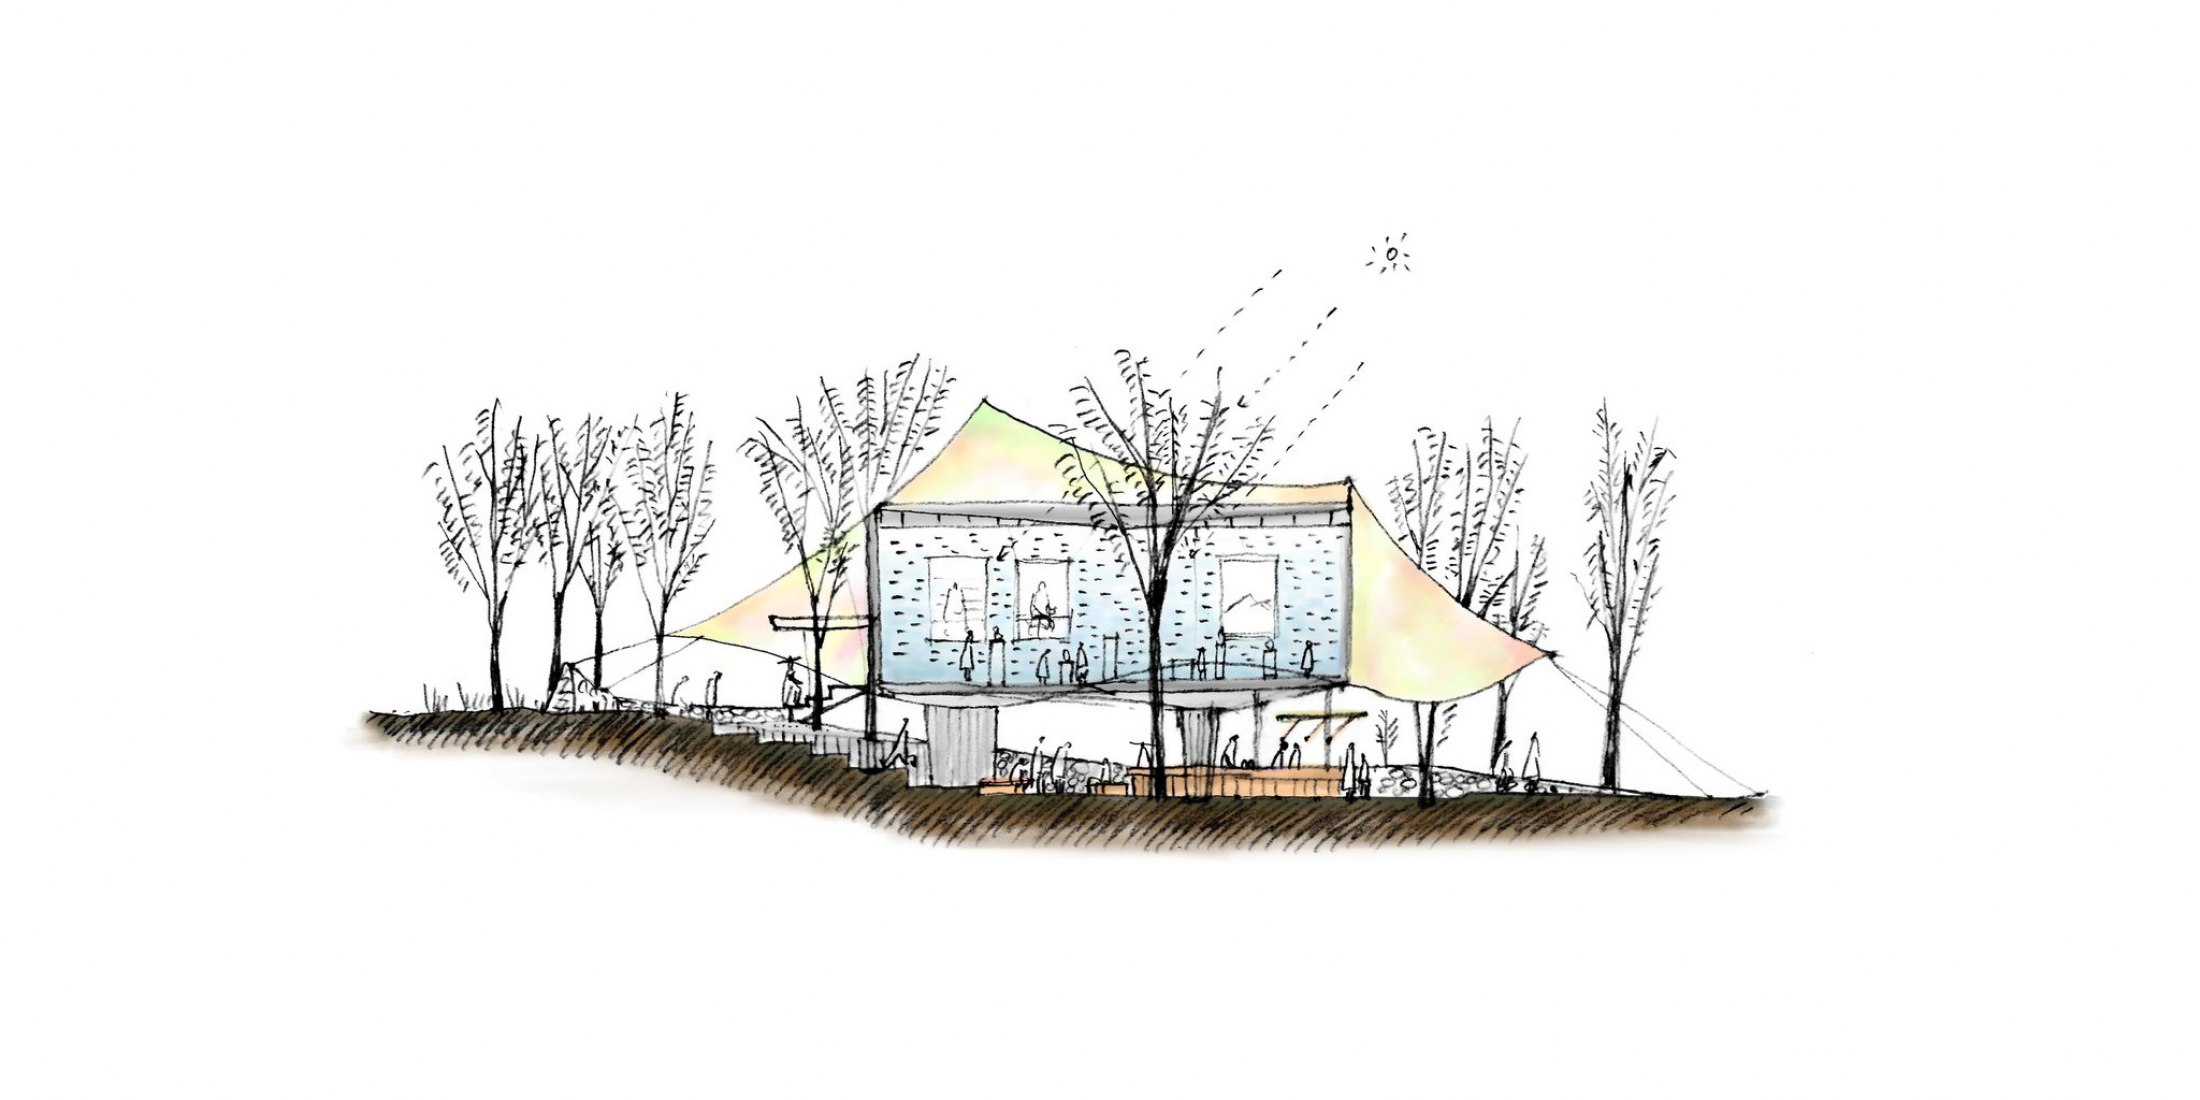 Exhibition design concept drawing, 2023. Image Courtesy of o+h architects